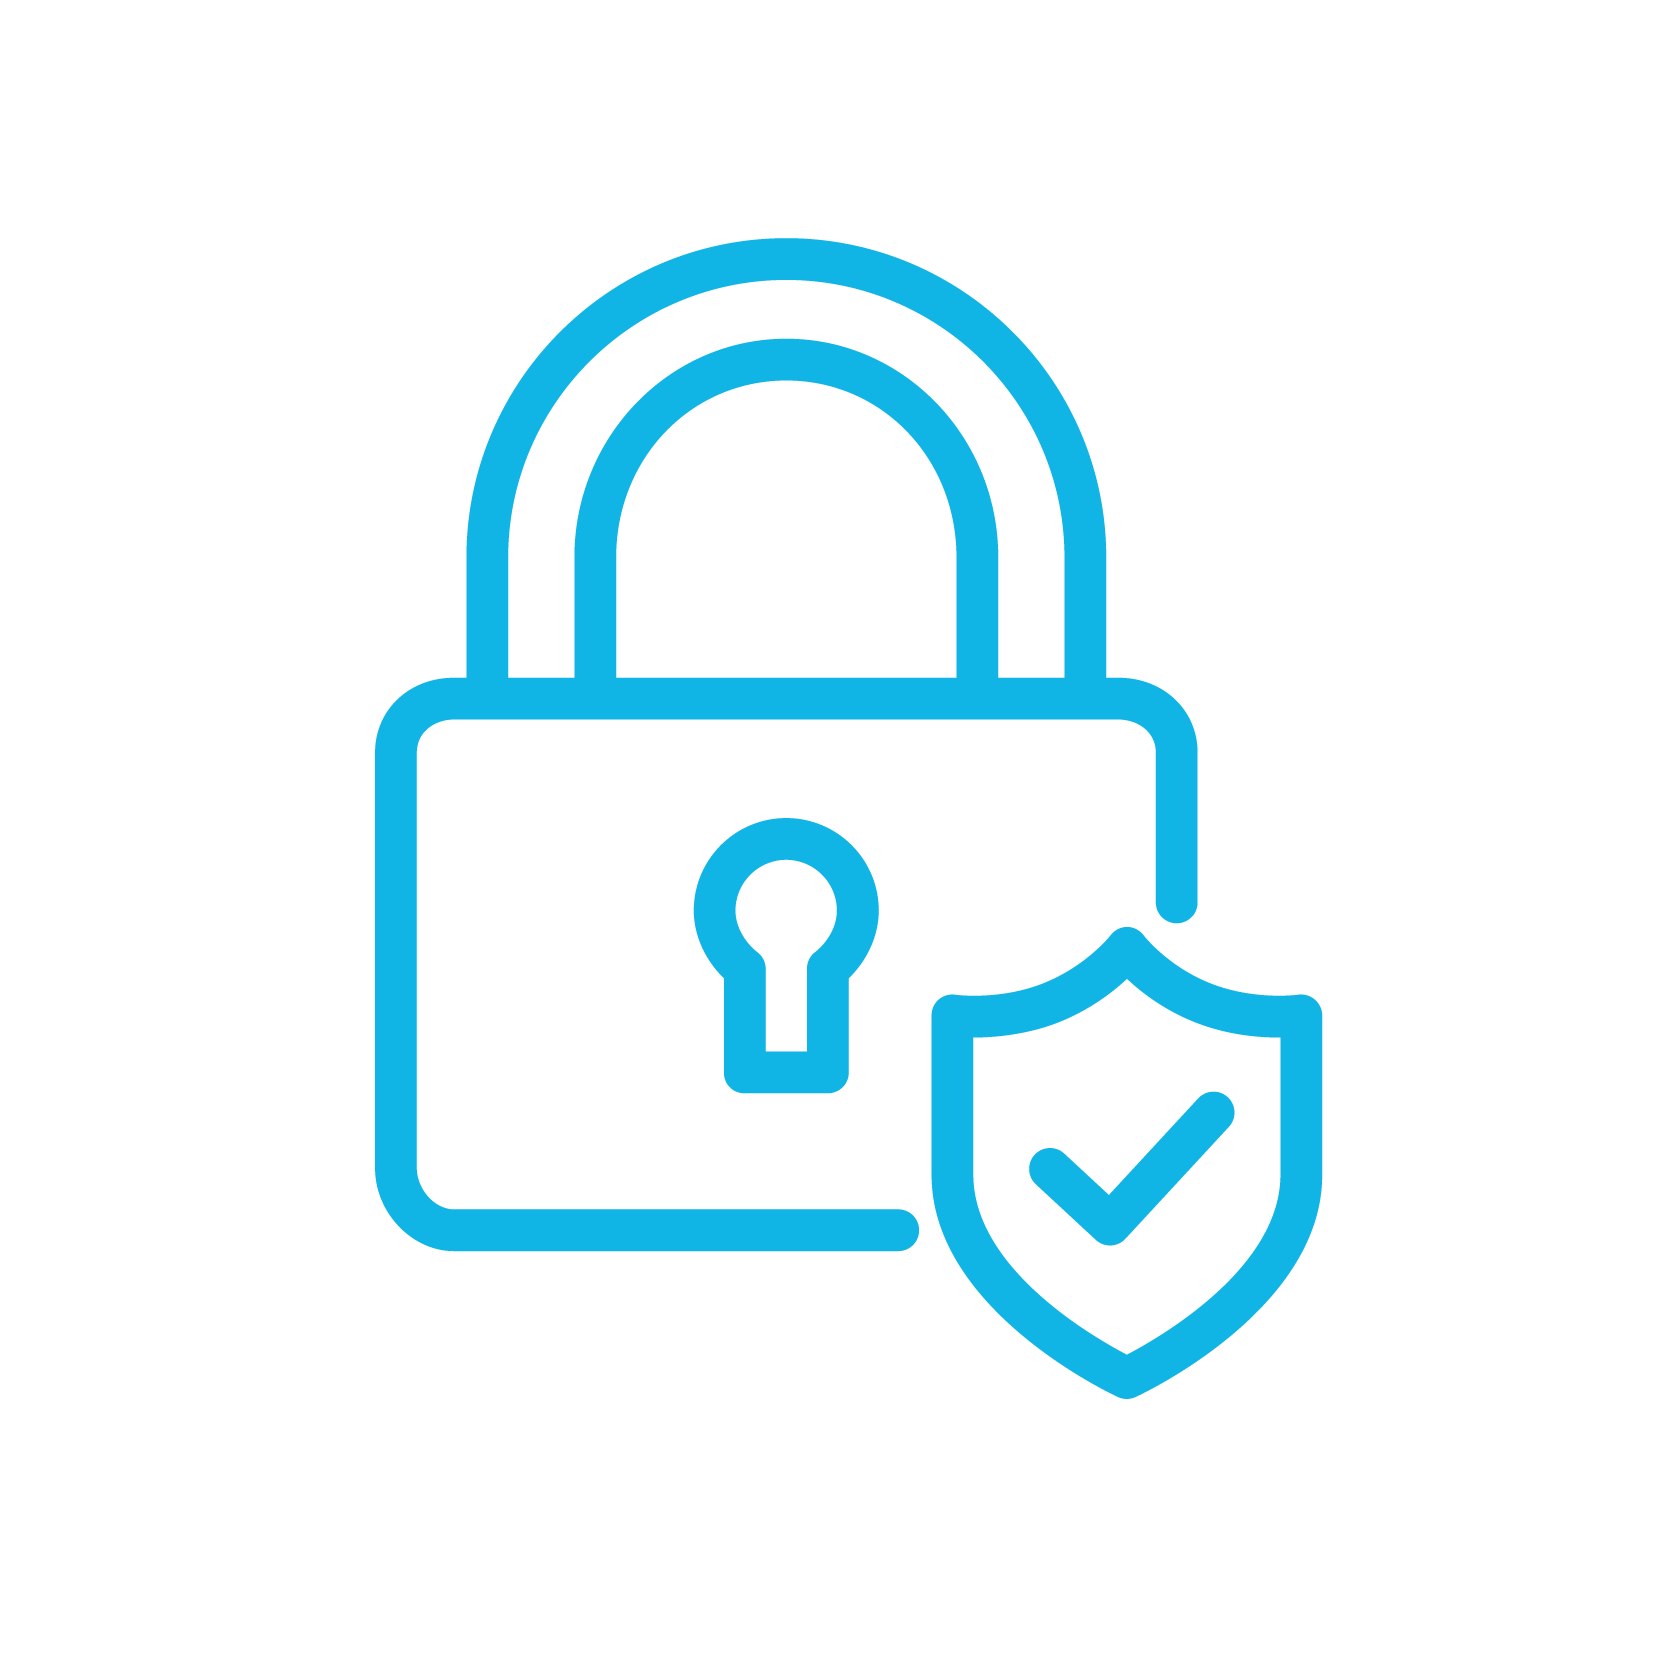 An icon of a lock with a shield in front of it, and a check-mark on the shield.  This represents the advanced security of information on HammerTech's platform, which exceeds industry standards for data protection, compliance, performance and usability.